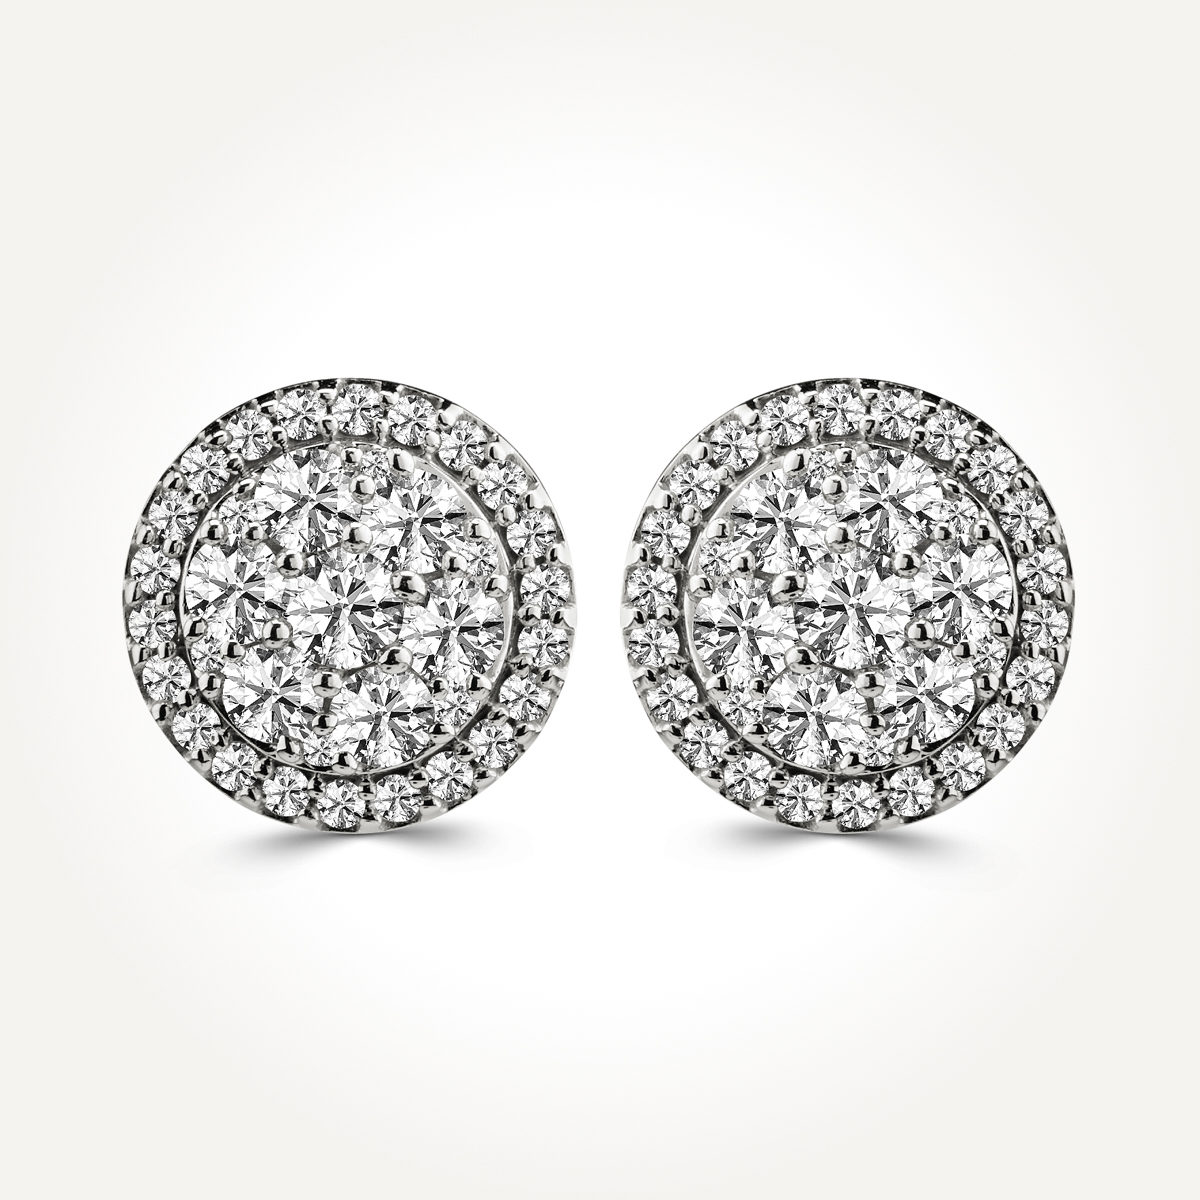 14KT White Gold Round Diamond Cluster Stud Earrings 1 CT. T.W.